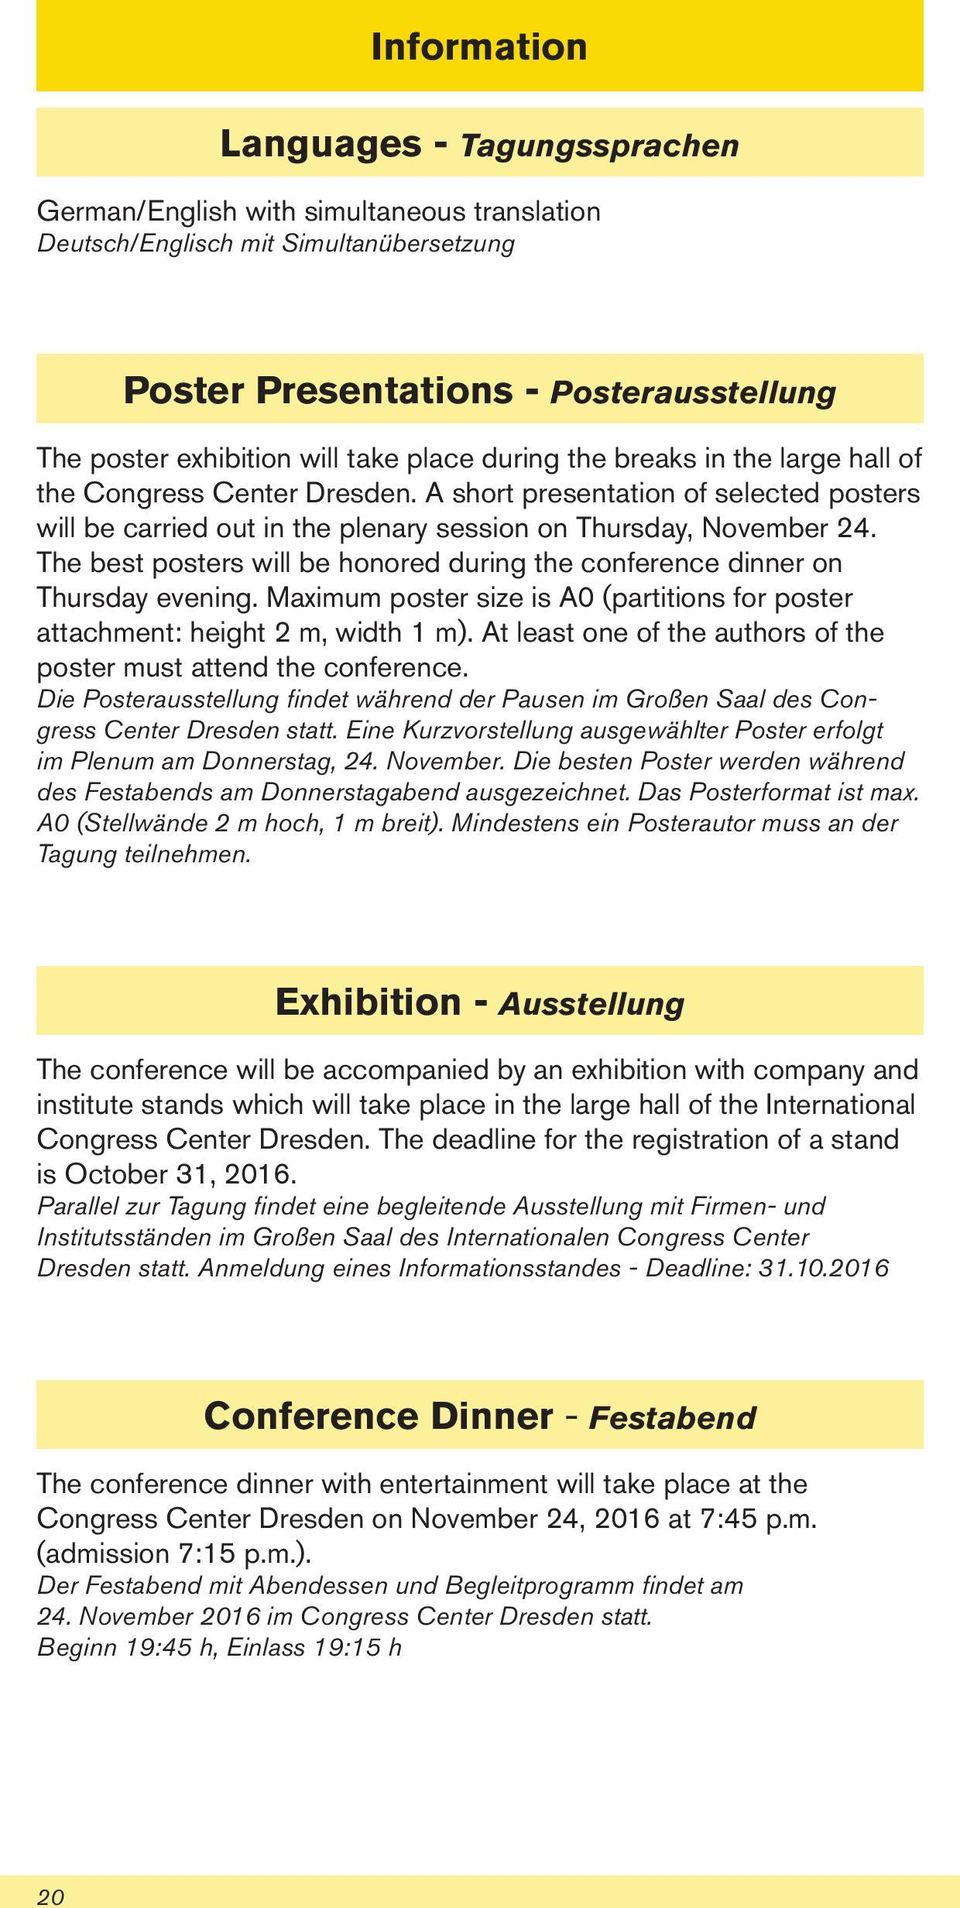 The best posters will be honored during the conference dinner on Thursday evening. Maximum poster size is A0 (partitions for poster attachment: height m, width m).